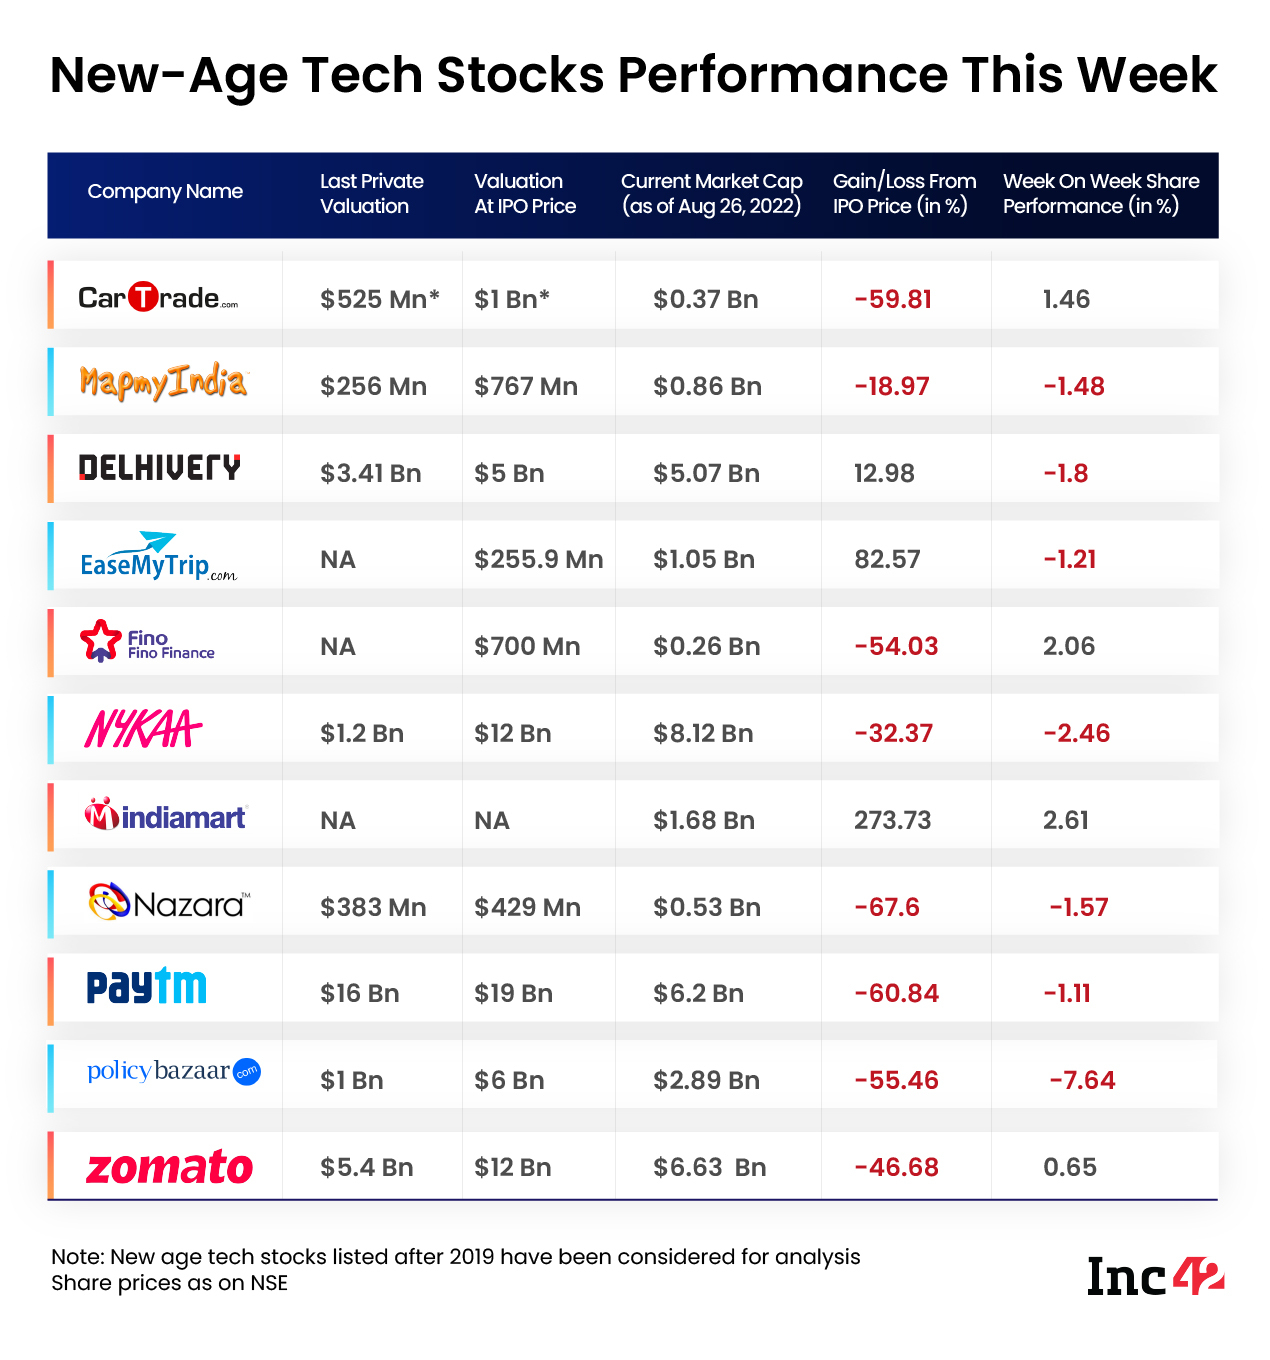 Another Subdued Week For New-Age Tech Stocks, Policybazaar Biggest Loser